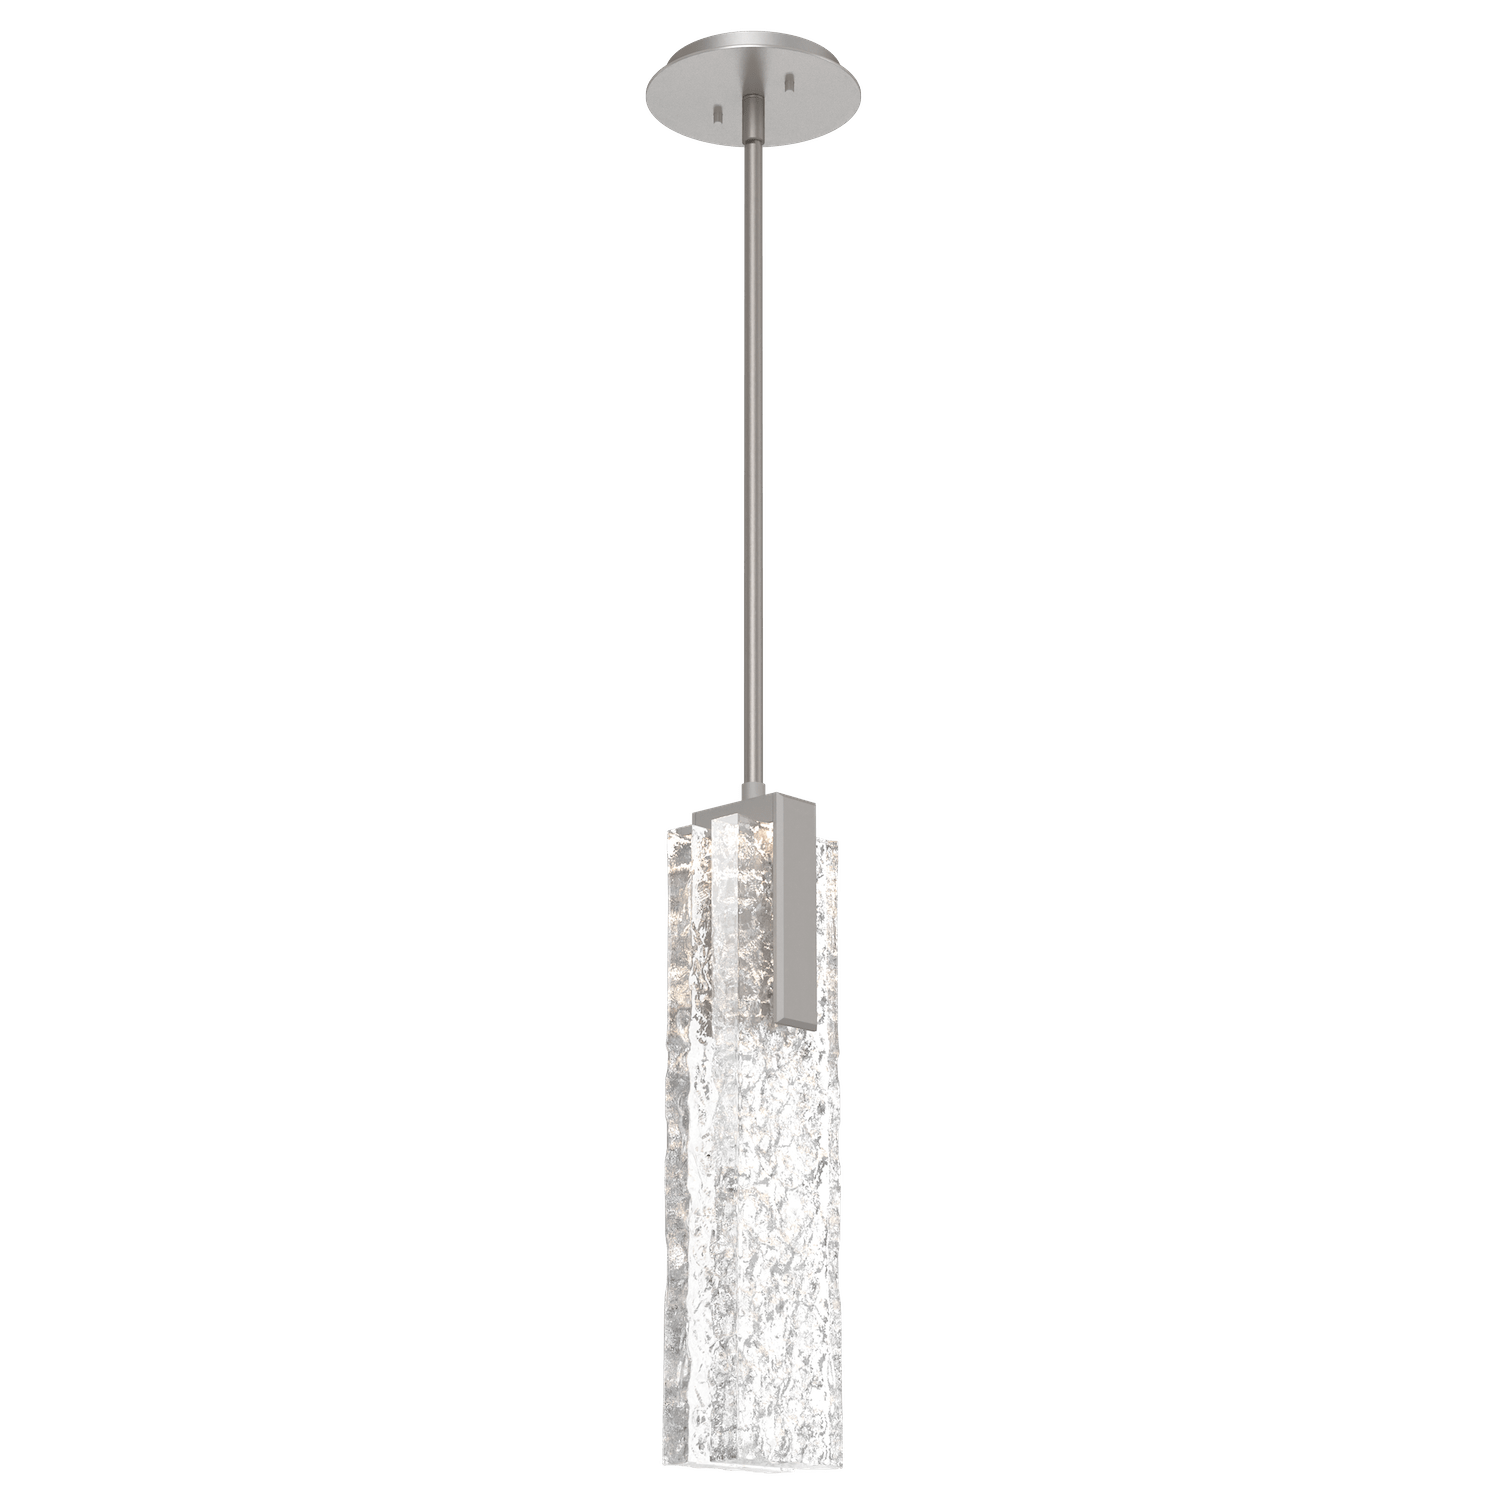 LAB0061-17-BS-GC-Hammerton-Studio-Glacier-pendant-light-with-metallic-beige-silver-finish-and-clear-blown-glass-with-geo-clear-cast-glass-diffusers-and-LED-lamping